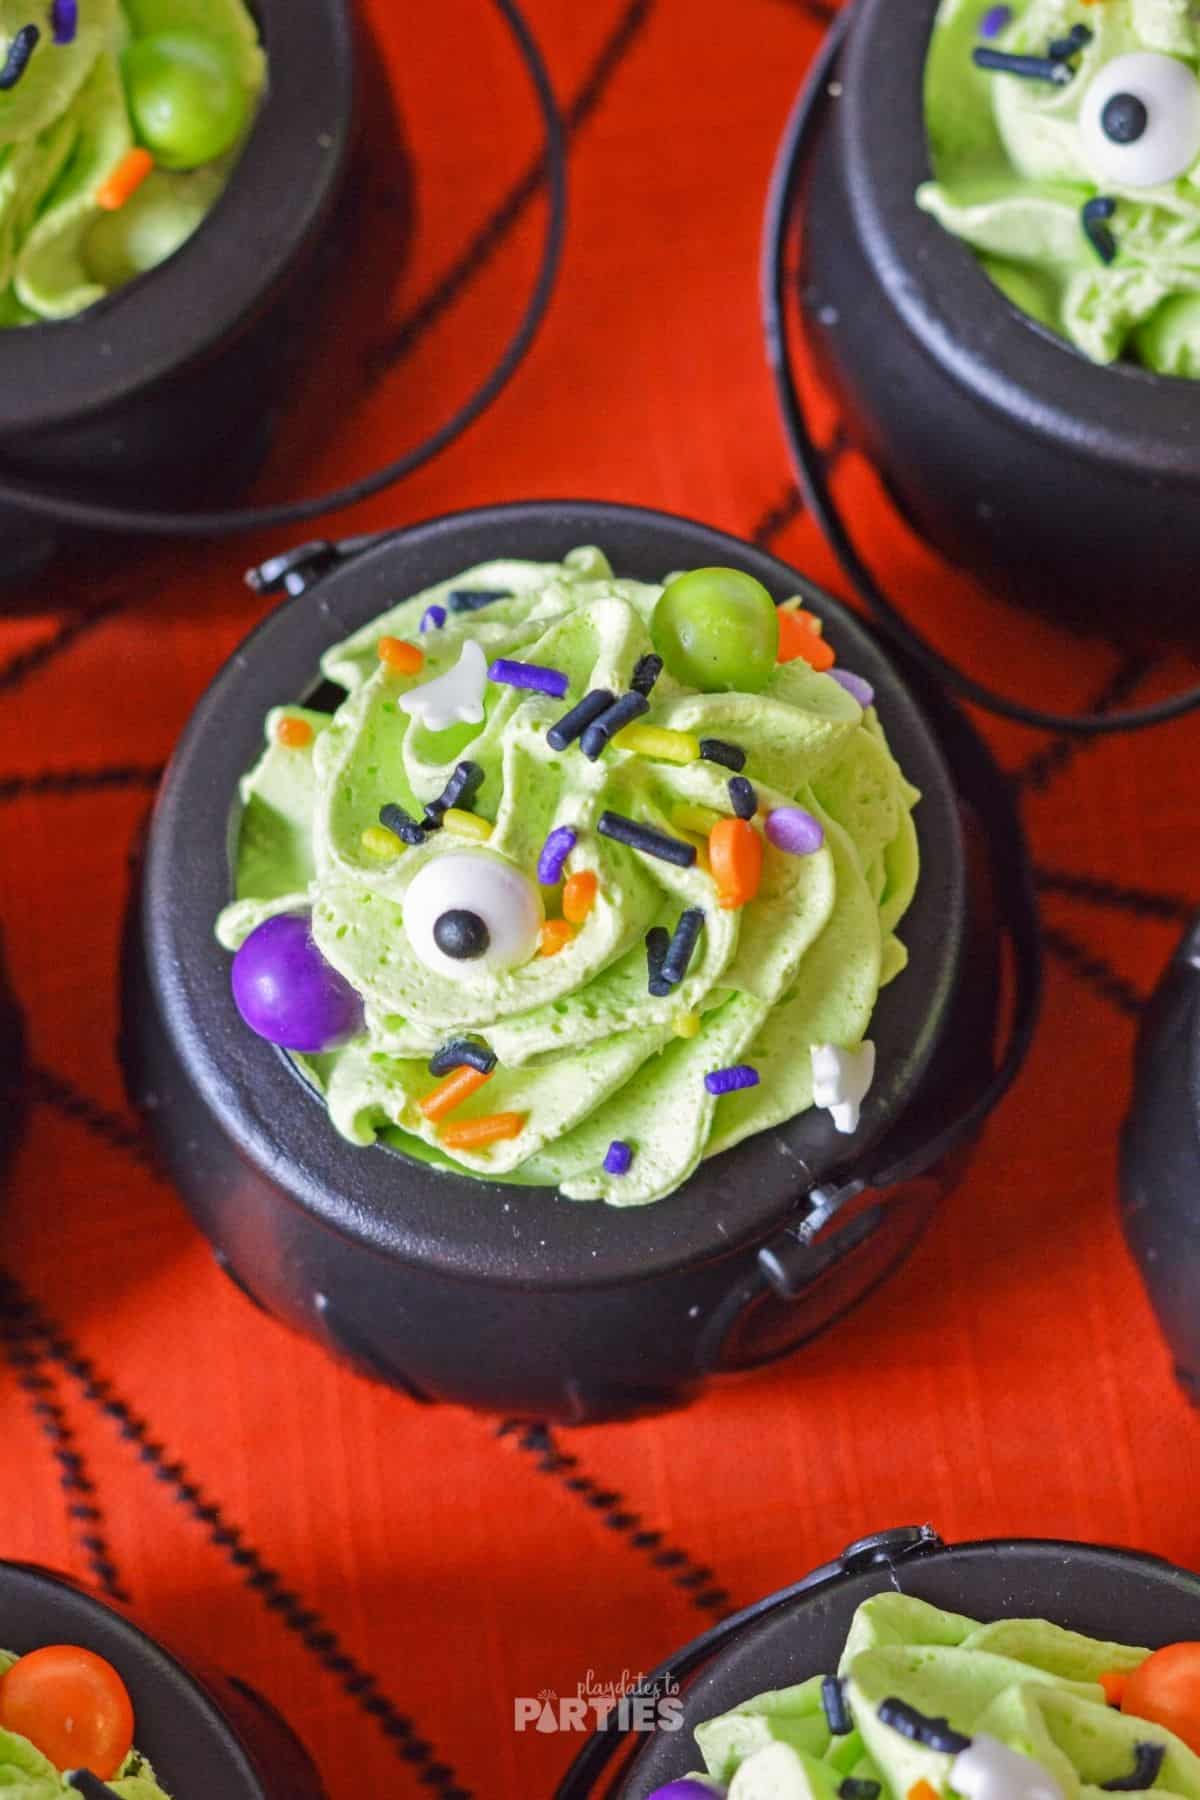 Top down view of a kids Halloween snack with green whipped cream and spooky Halloween sprinkles.